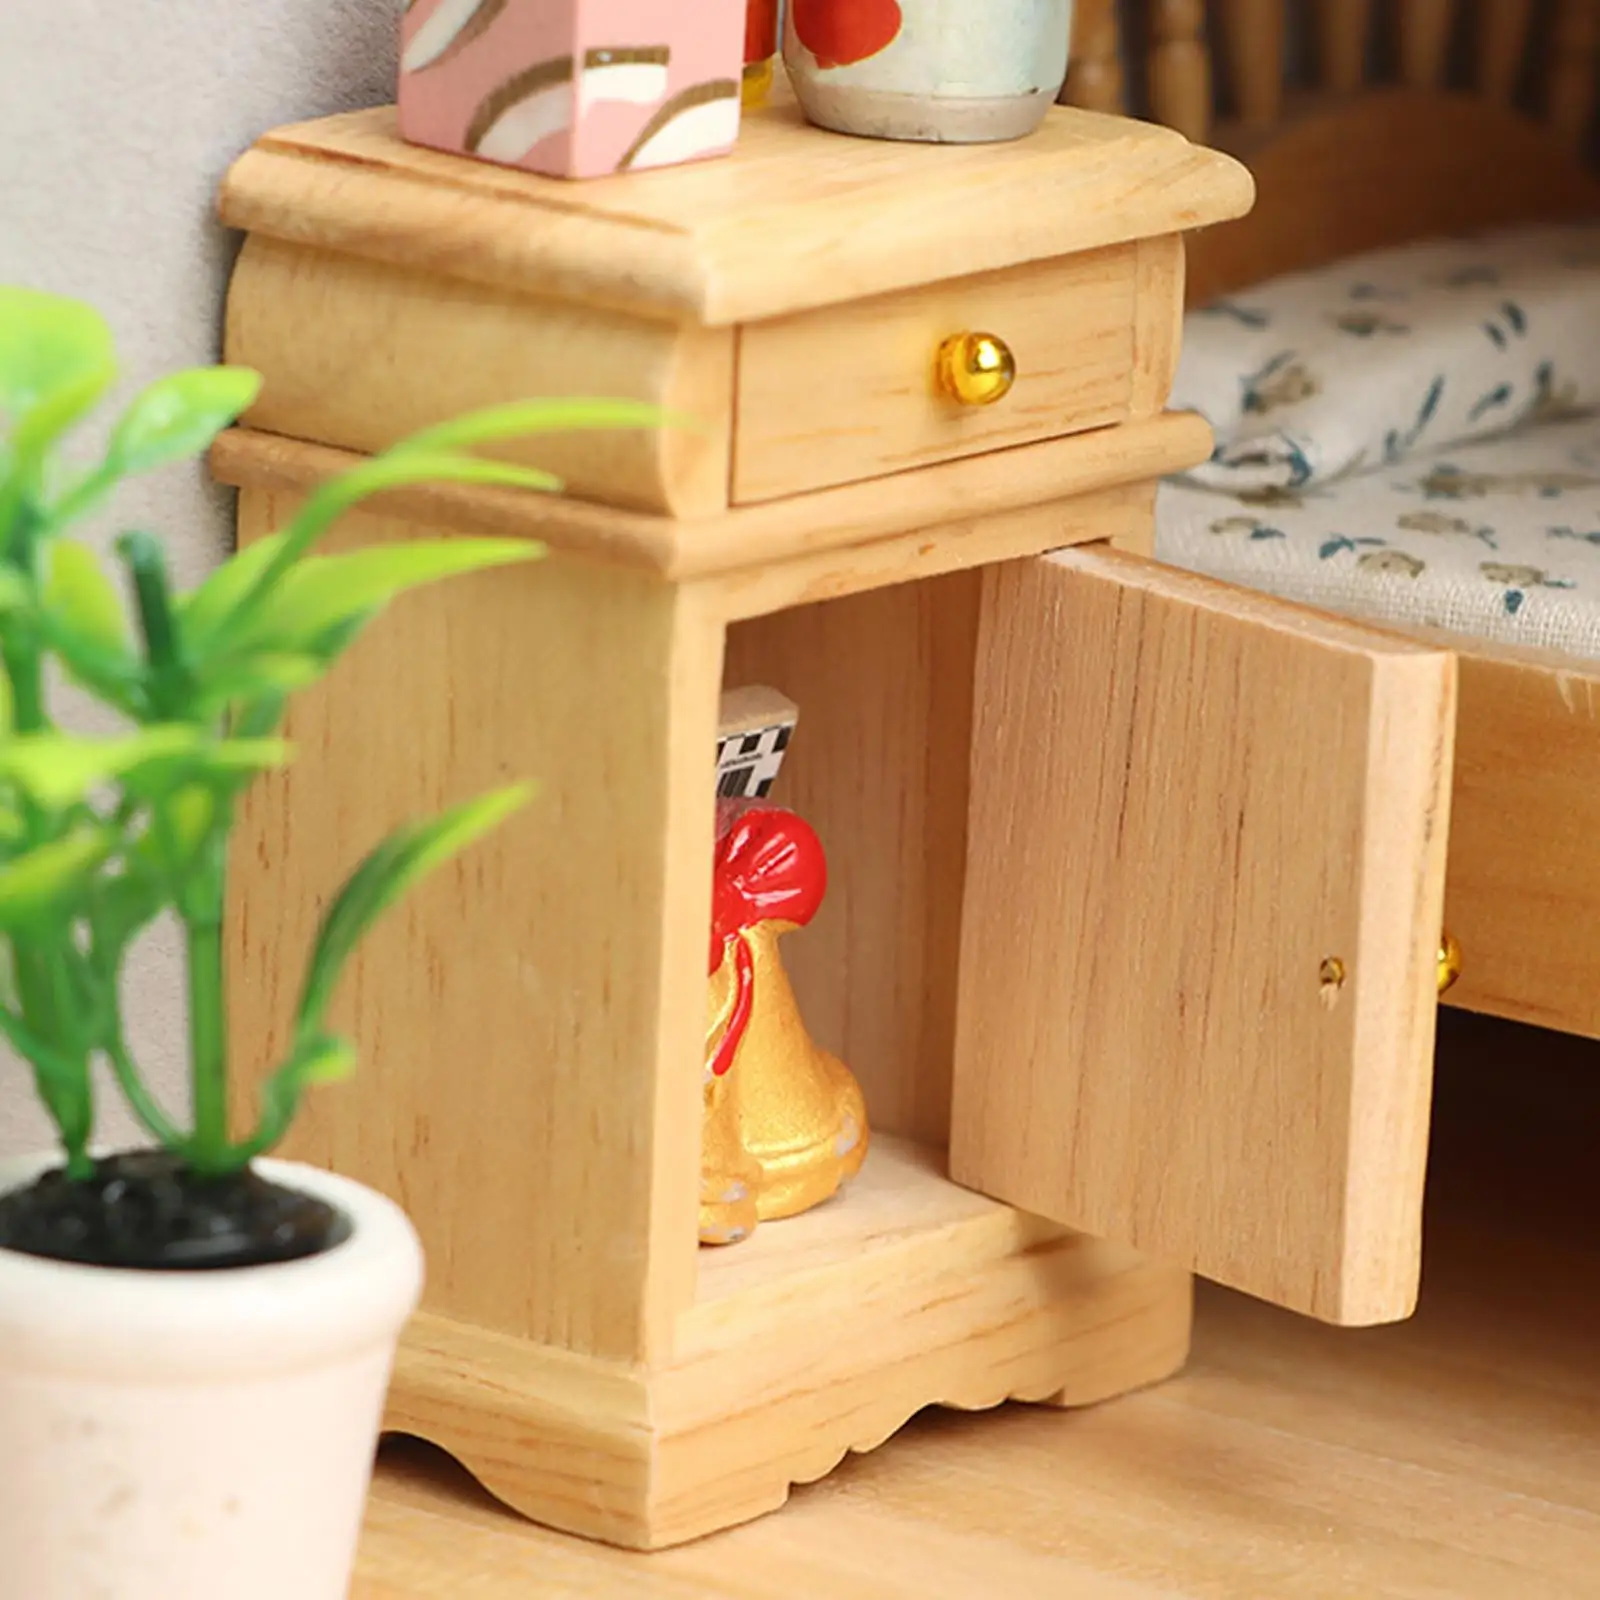 1:12 Wooden: 12 Dollhouse Miniature Furniture for Accessories Supplies